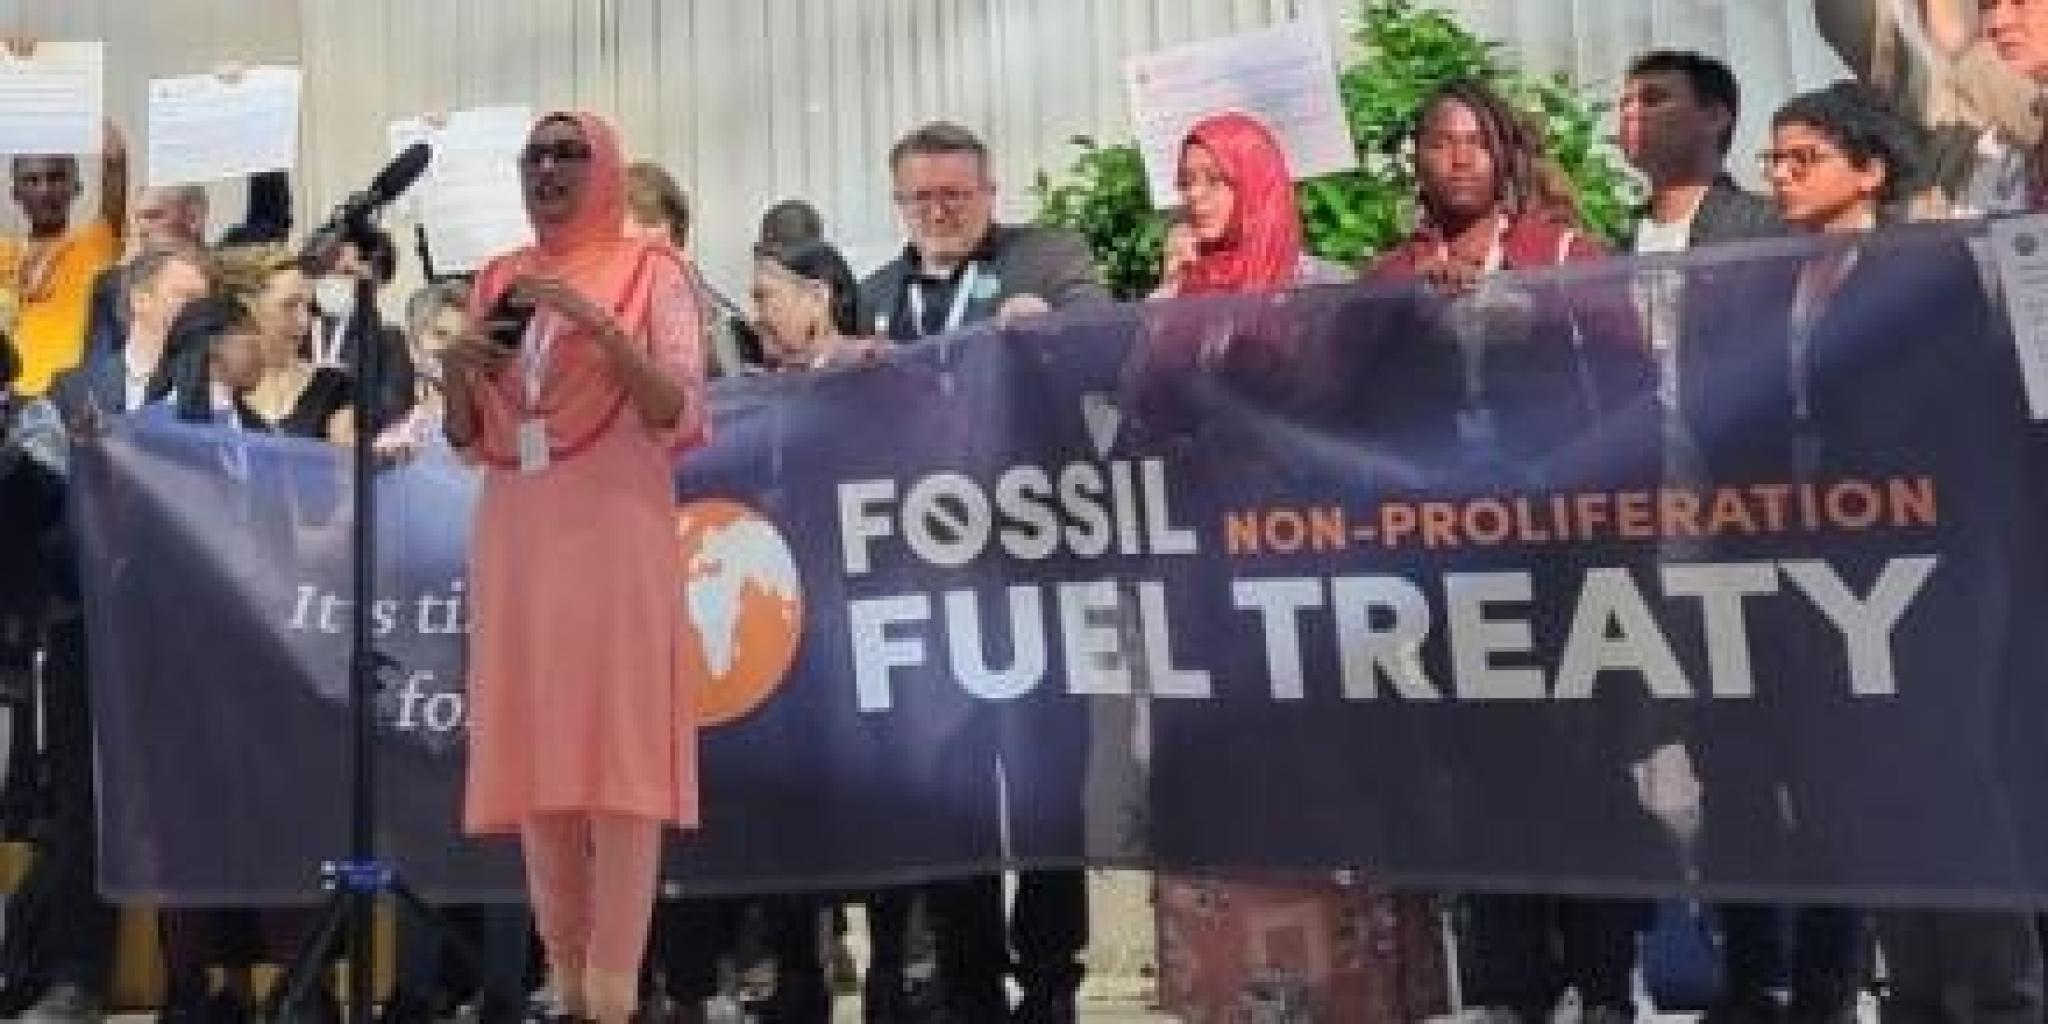 Image credit: Image of a rally for a Fossil Fuel Non-Proliferation Treaty at the United Nations Environment Program Stockholm+50 conference, from Fossil Fuel Non-Proliferation Treaty Initiative 3 June 2022 press release.